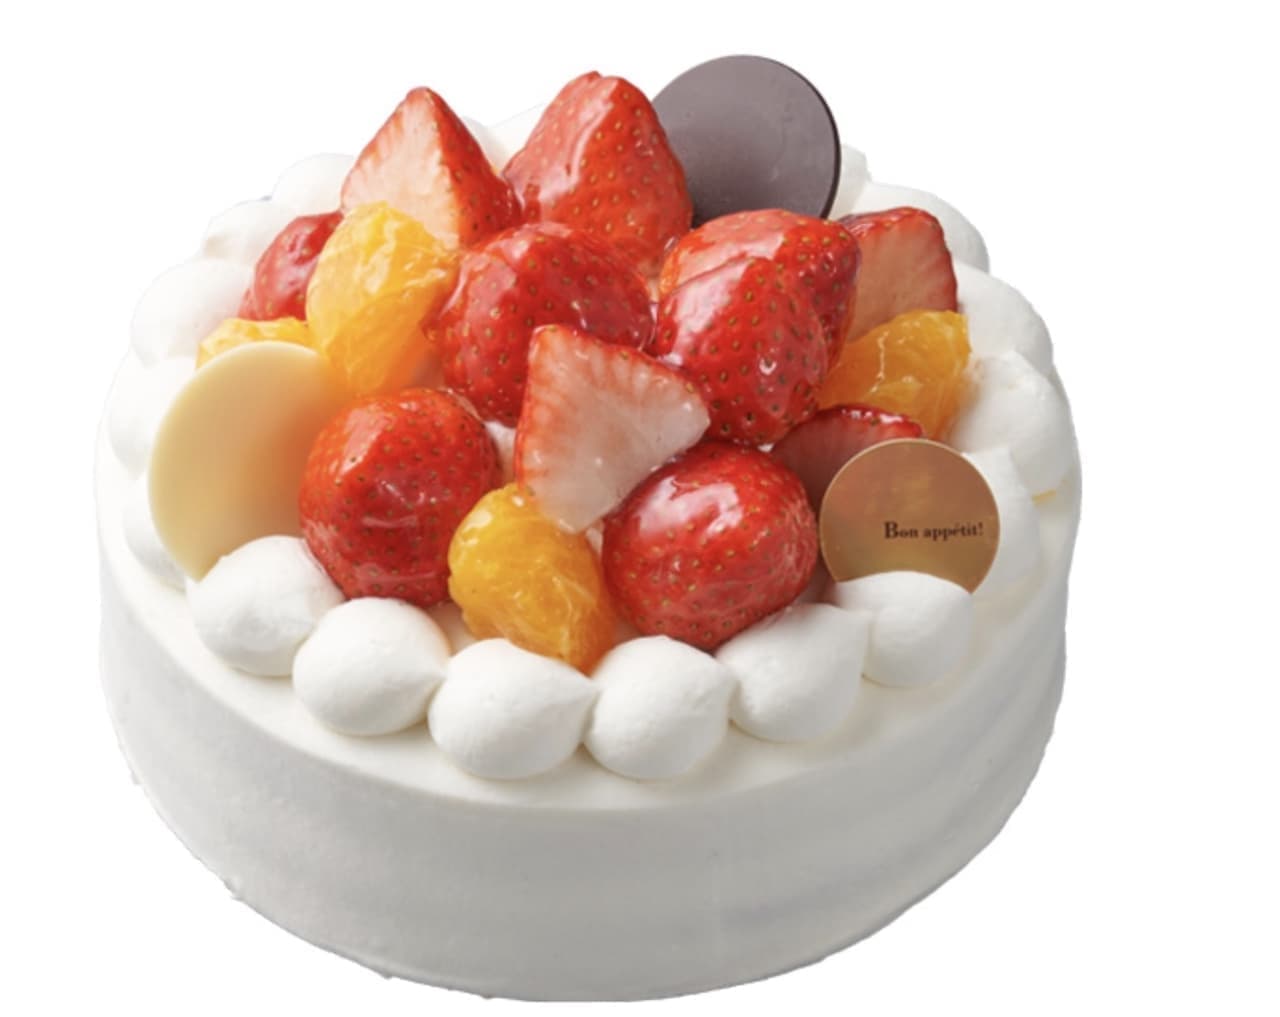 Chateraise "Decoration of Setoka and Strawberries from Ehime Prefecture"